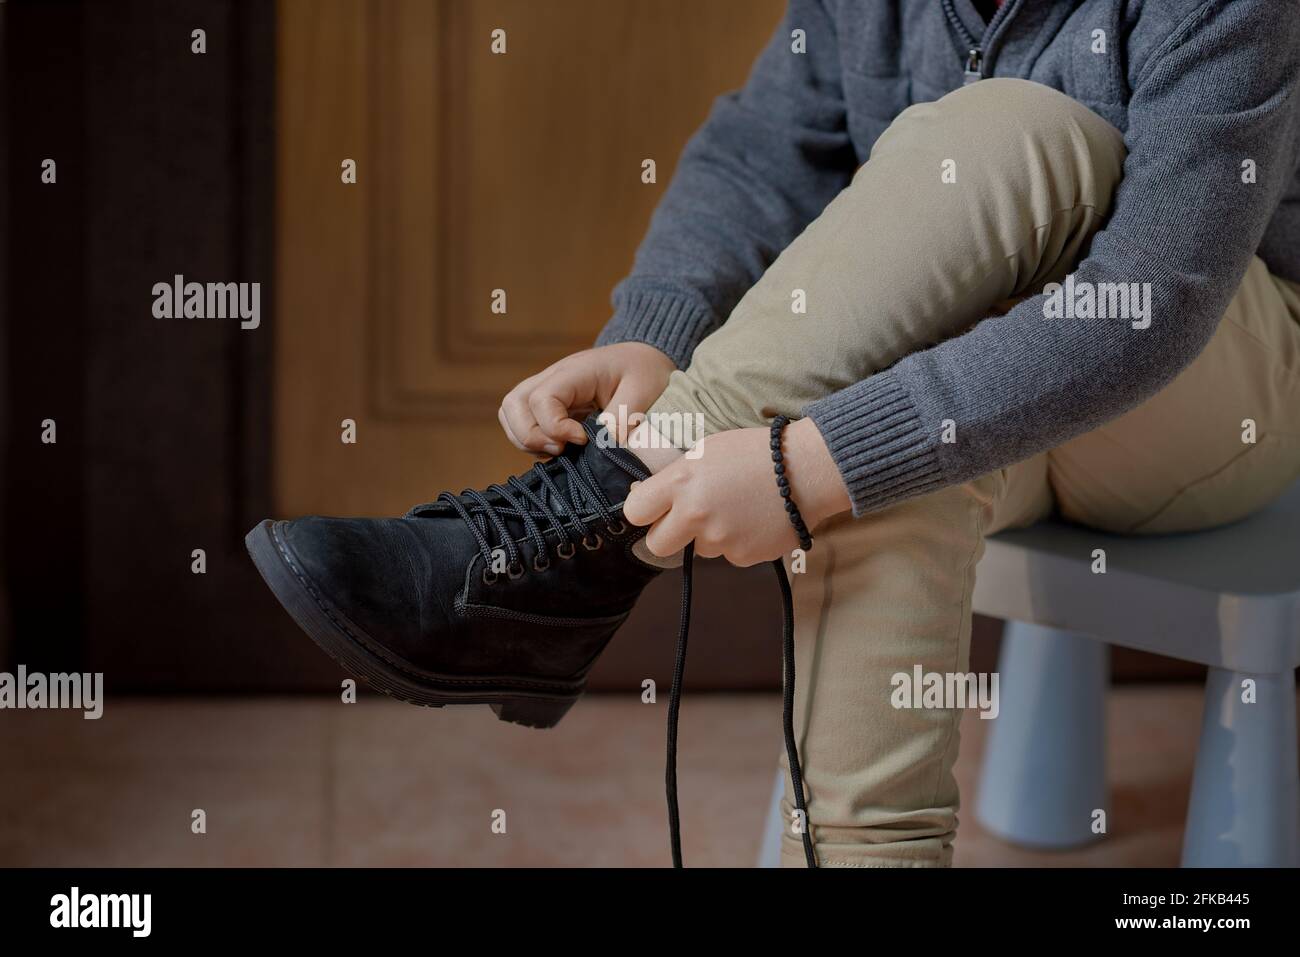 Child learning to tie shoelaces on boots before leaving home, selective focus Stock Photo